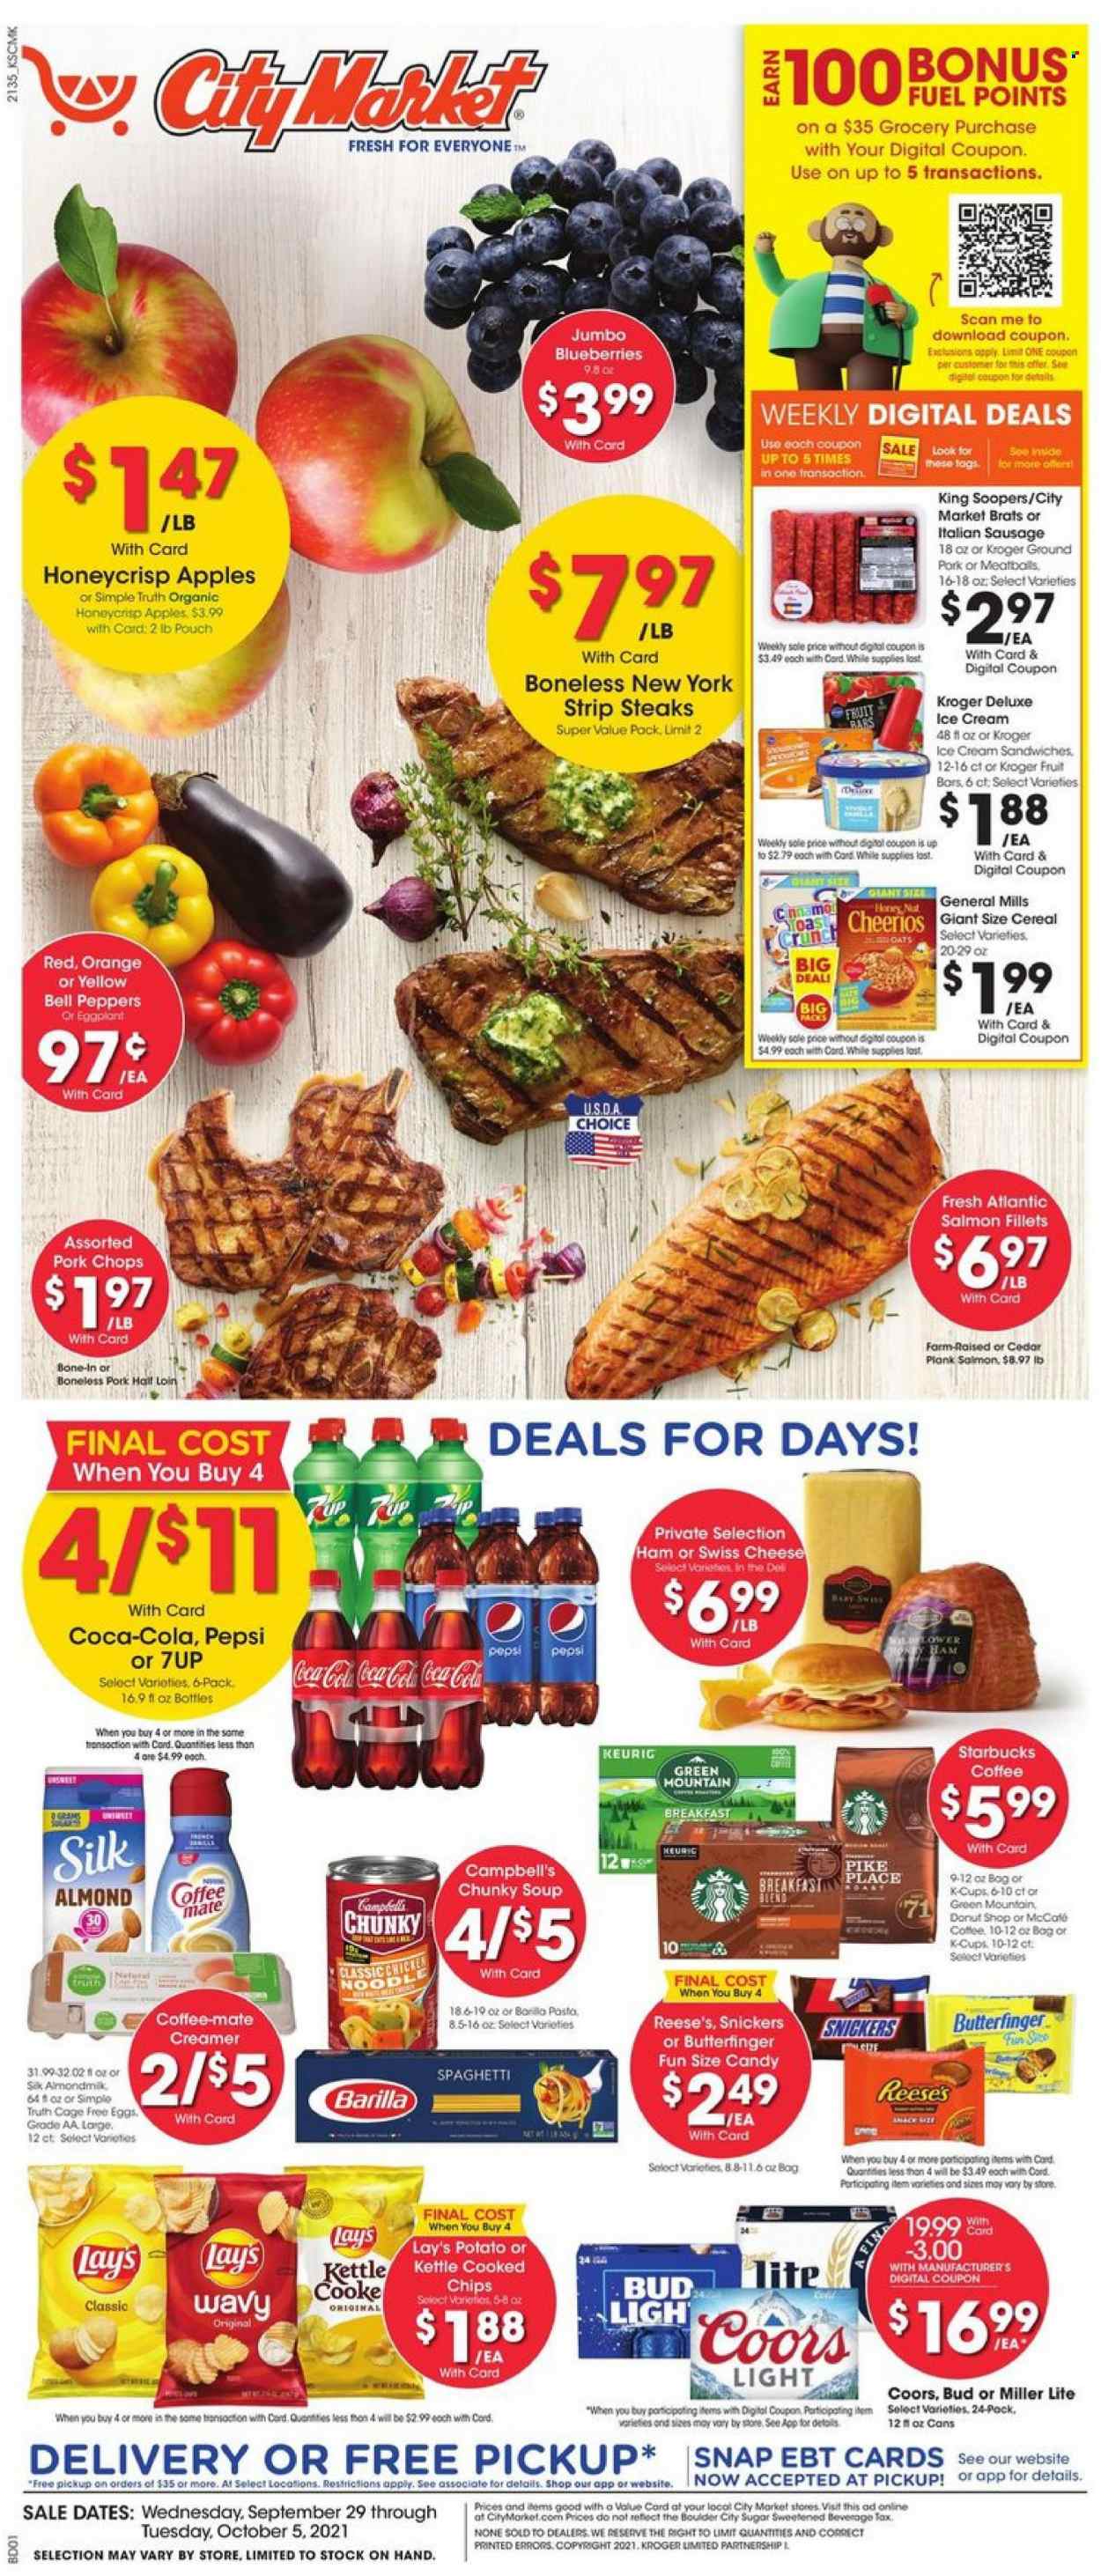 thumbnail - City Market Flyer - 09/29/2021 - 10/05/2021 - Sales products - bell peppers, peppers, eggplant, apples, blueberries, oranges, salmon, salmon fillet, Campbell's, spaghetti, soup, Barilla, noodles, ham, sausage, italian sausage, swiss cheese, cheese, Coffee-Mate, Silk, eggs, creamer, ice cream, ice cream sandwich, Reese's, Snickers, chips, Lay’s, kettle, sugar, cereals, Cheerios, Coca-Cola, Pepsi, 7UP, Starbucks, coffee capsules, L'Or, K-Cups, Keurig, breakfast blend, beer, beef meat, steak, striploin steak, ground pork, pork chops, pork meat, Miller Lite, Coors. Page 1.